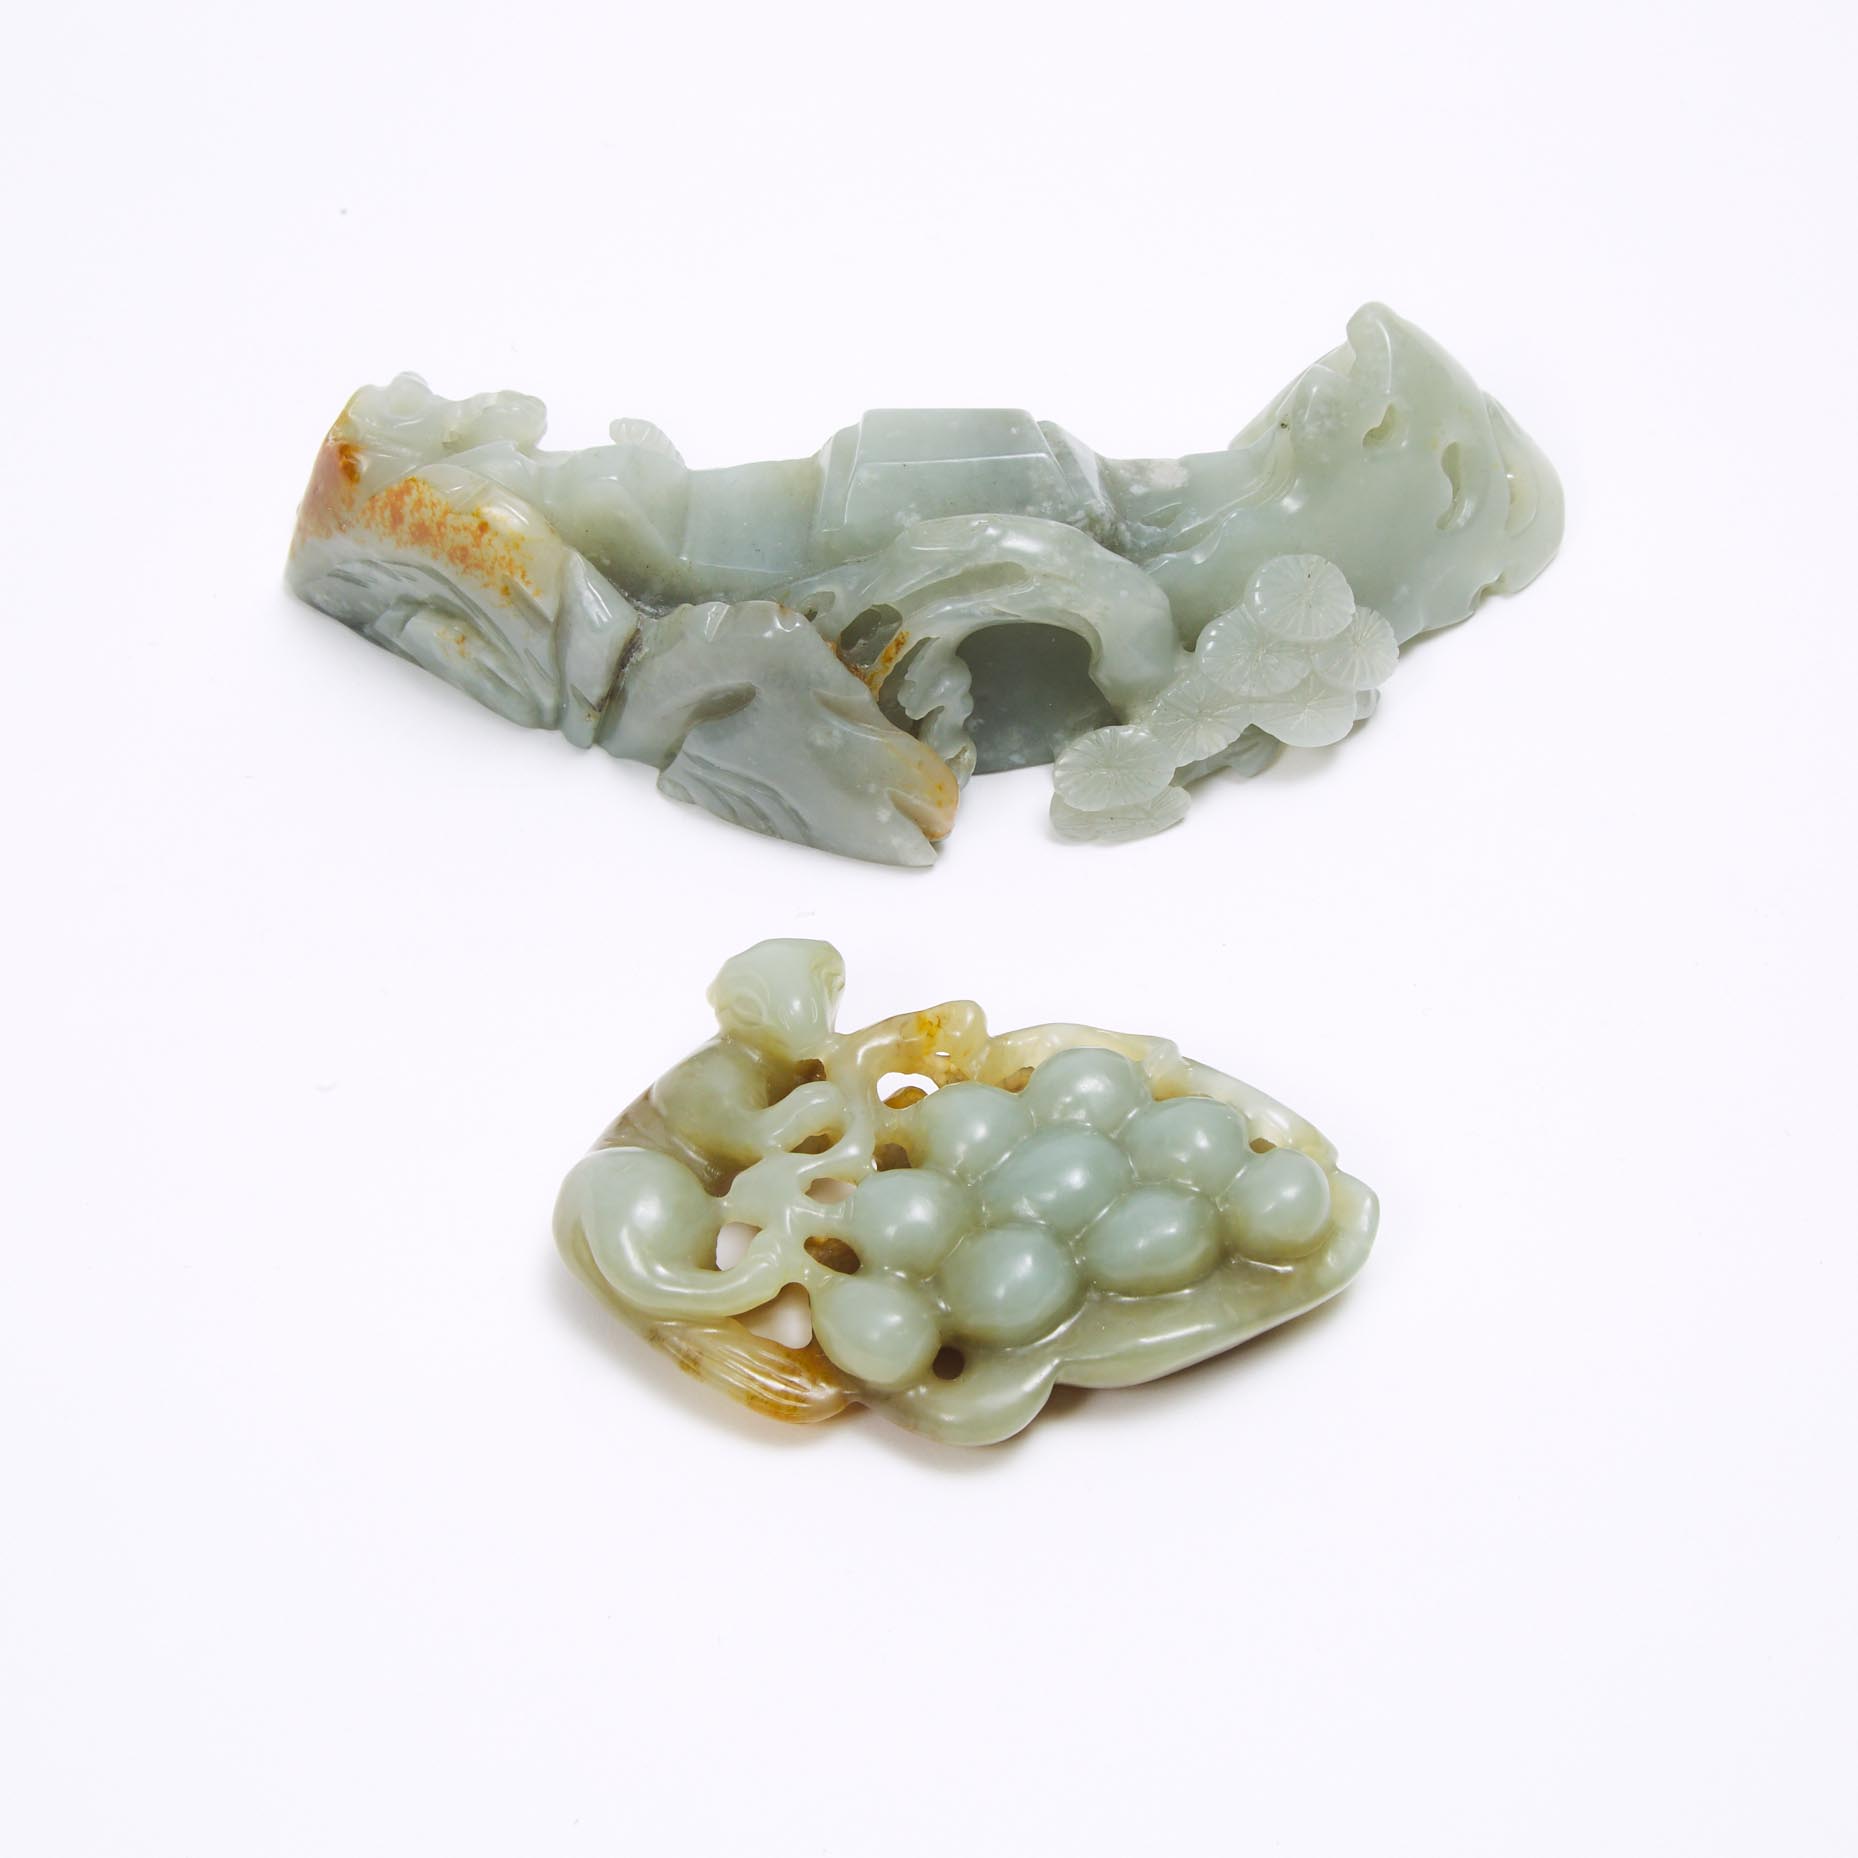 Two Celadon and Russet Jade Carvings, 19th/20th Century